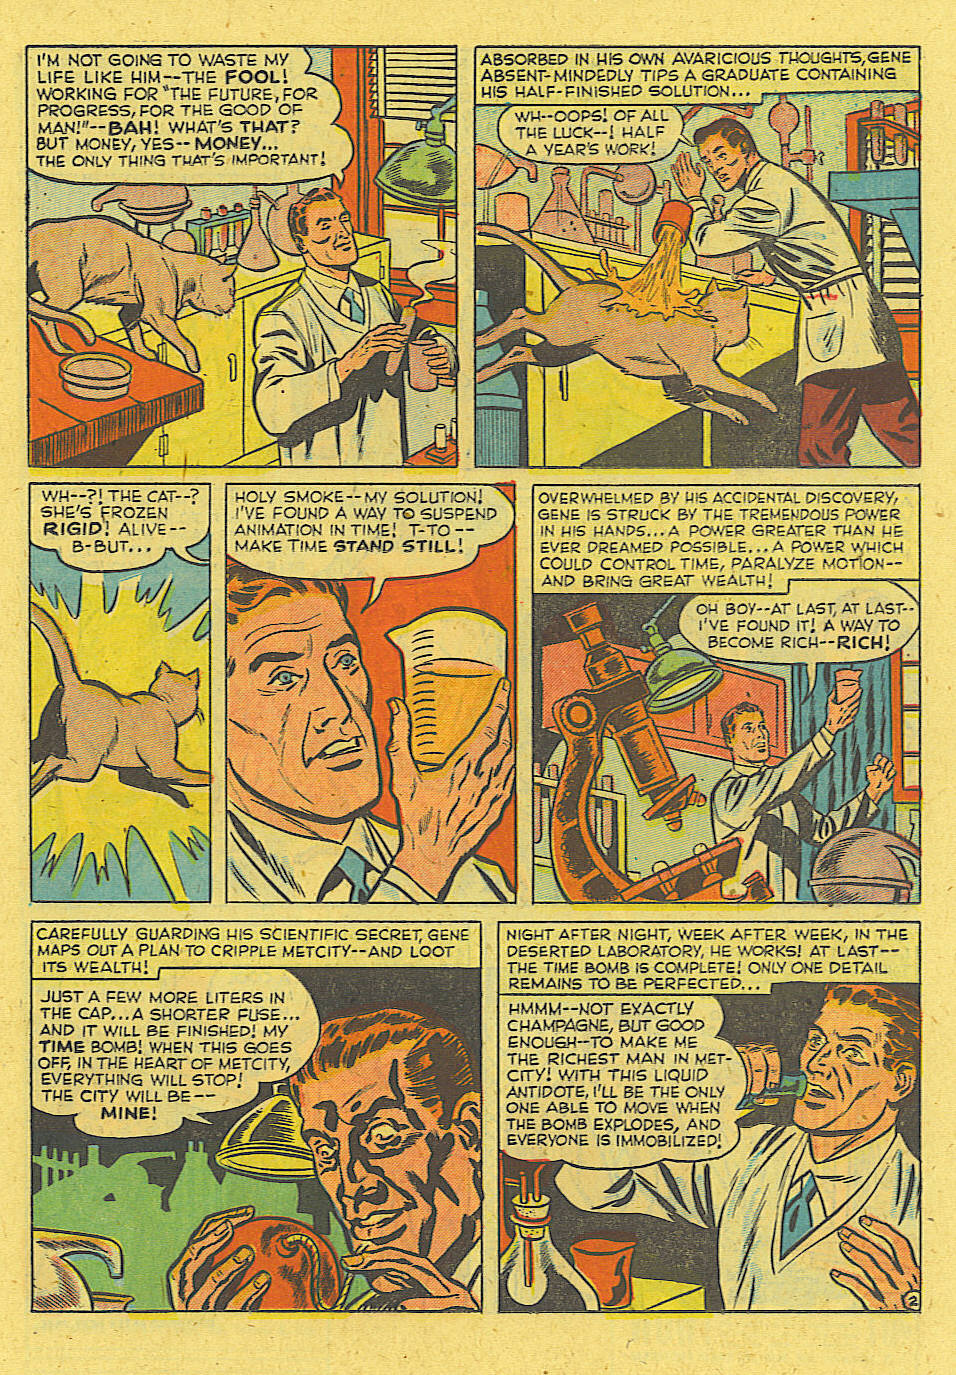 Marvel Tales (1949) 103 Page 7